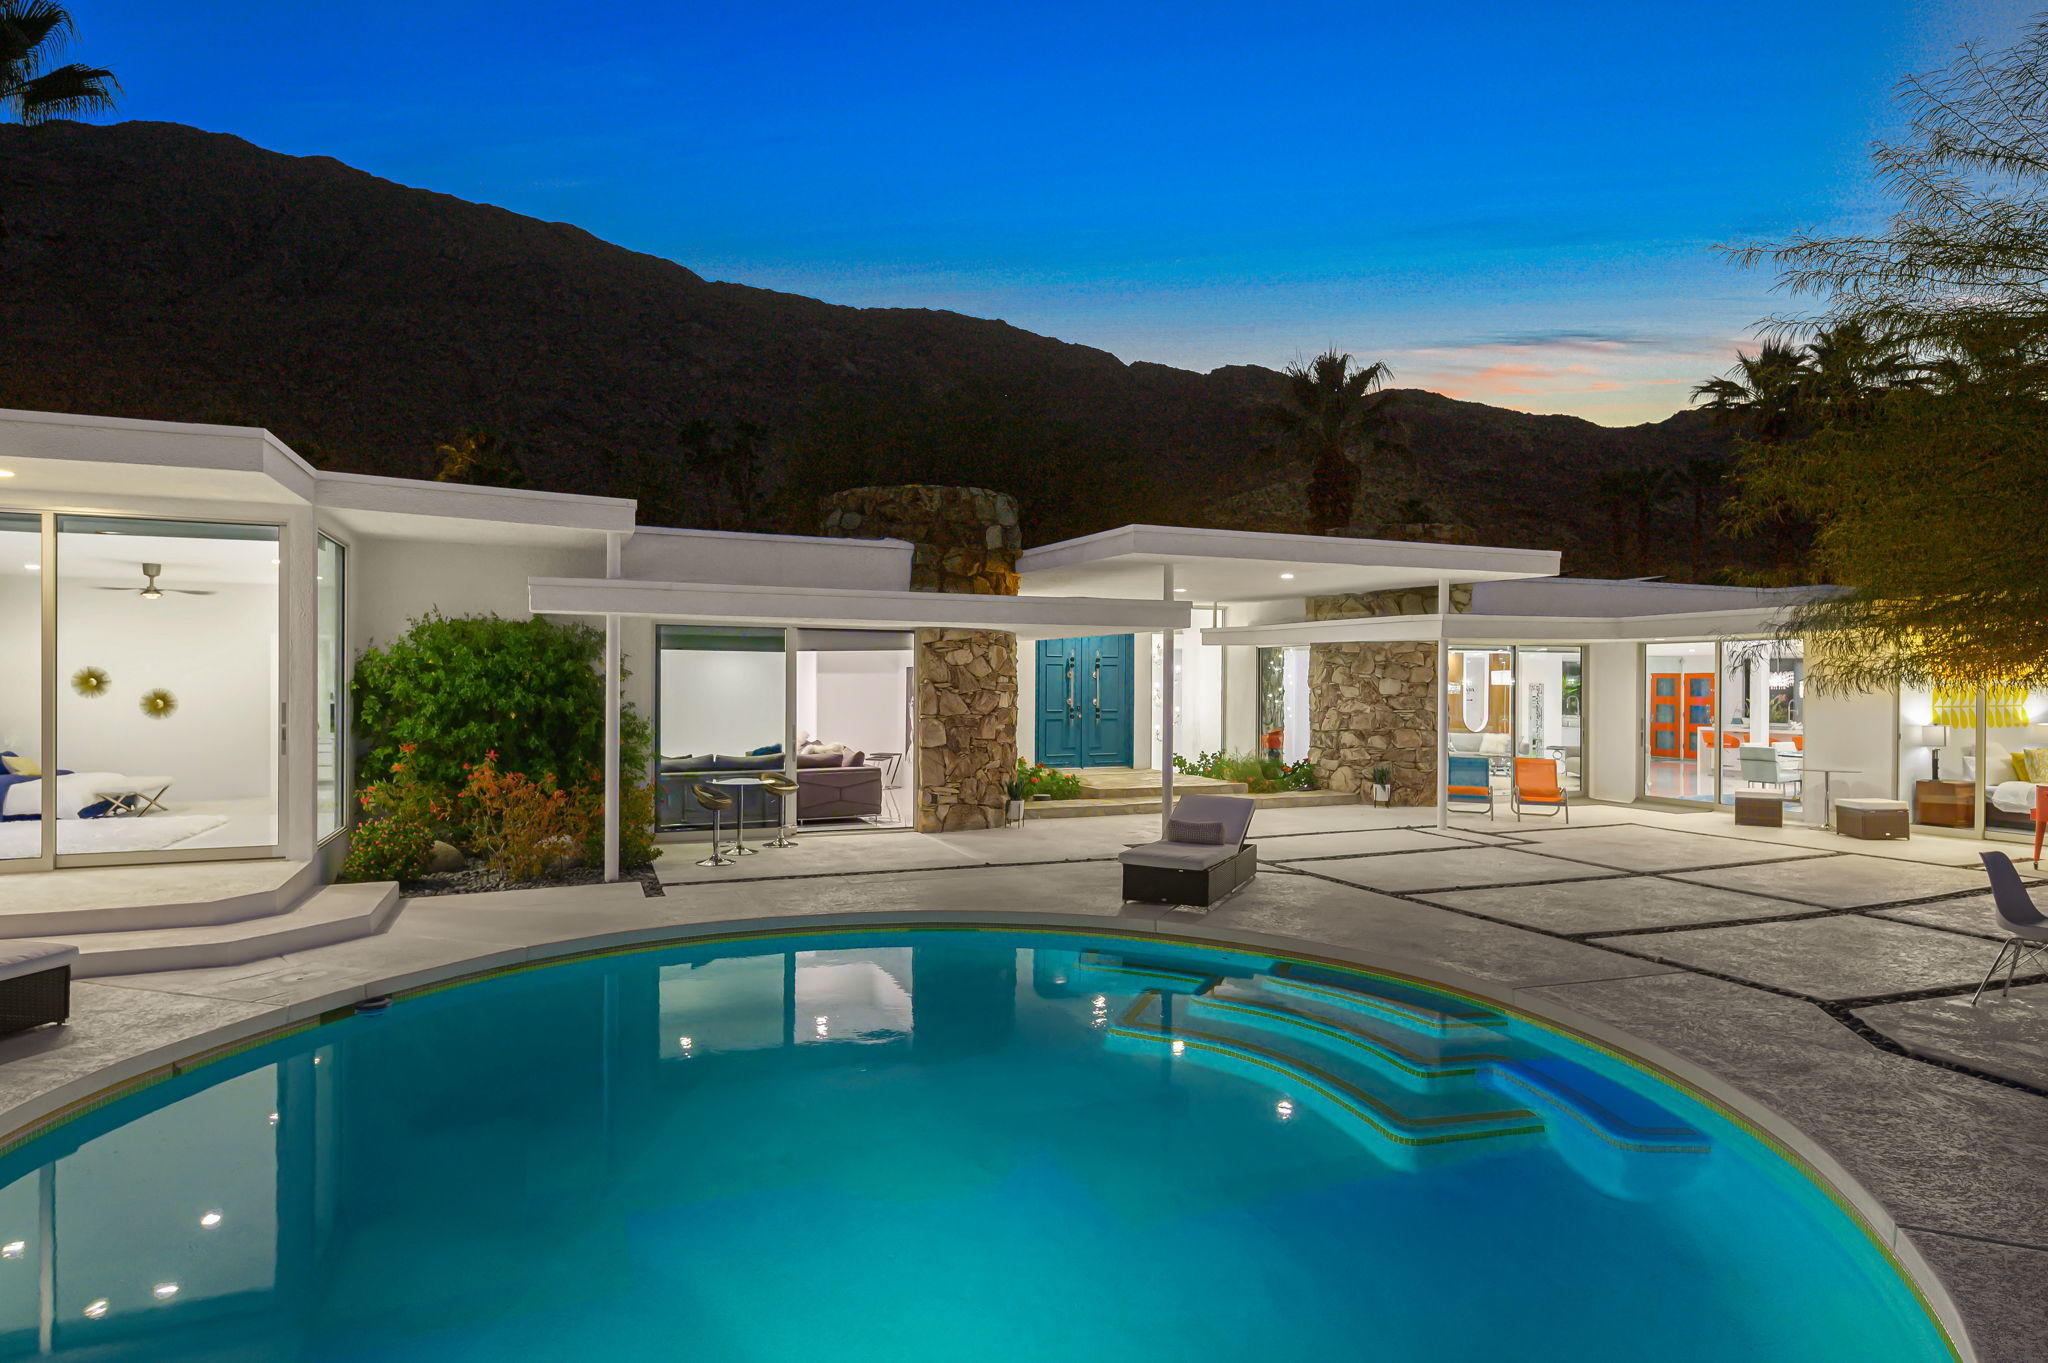 In a word, Fabulous! The Palm Springs' Gala House, enviably known as much for its enduring Mid-Century Modern style as the setting for magnificent events, fund-raisers and soirees, is now for sale turnkey furnished! Virtually invisible from the street and walking distance to the center of Palm Springs the sprawling single-level estate is located in the Historic Tennis Club. This incredible enclave showcases a down-to-the-studs remodel that retains its original architectural flair and complements it with state-of-the-art finishes, fixtures and systems. A bright orange gate opens to reveal the home's private grounds, which measure .33 acres and display a circular swimming pool. Approx. 4,825 s.f., the 5-bedroom, 4-bath design features a large living room with original stone fireplace, a stunning waterfall island kitchen with custom glossy orange and white soft-close cabinetry and a Bertazzoni range, a pool-view media room, and a grand master suite with sitting room and a glamourous bath. Powered by an owned solar system, the chic residence displays double entry doors in aqua, walls of glass, high ceilings, polished tile floors throughout, custom lighting fixtures, reversed archways, and seamless mirrored walls in key locations.  Property is also available for lease.  Ask us for details.